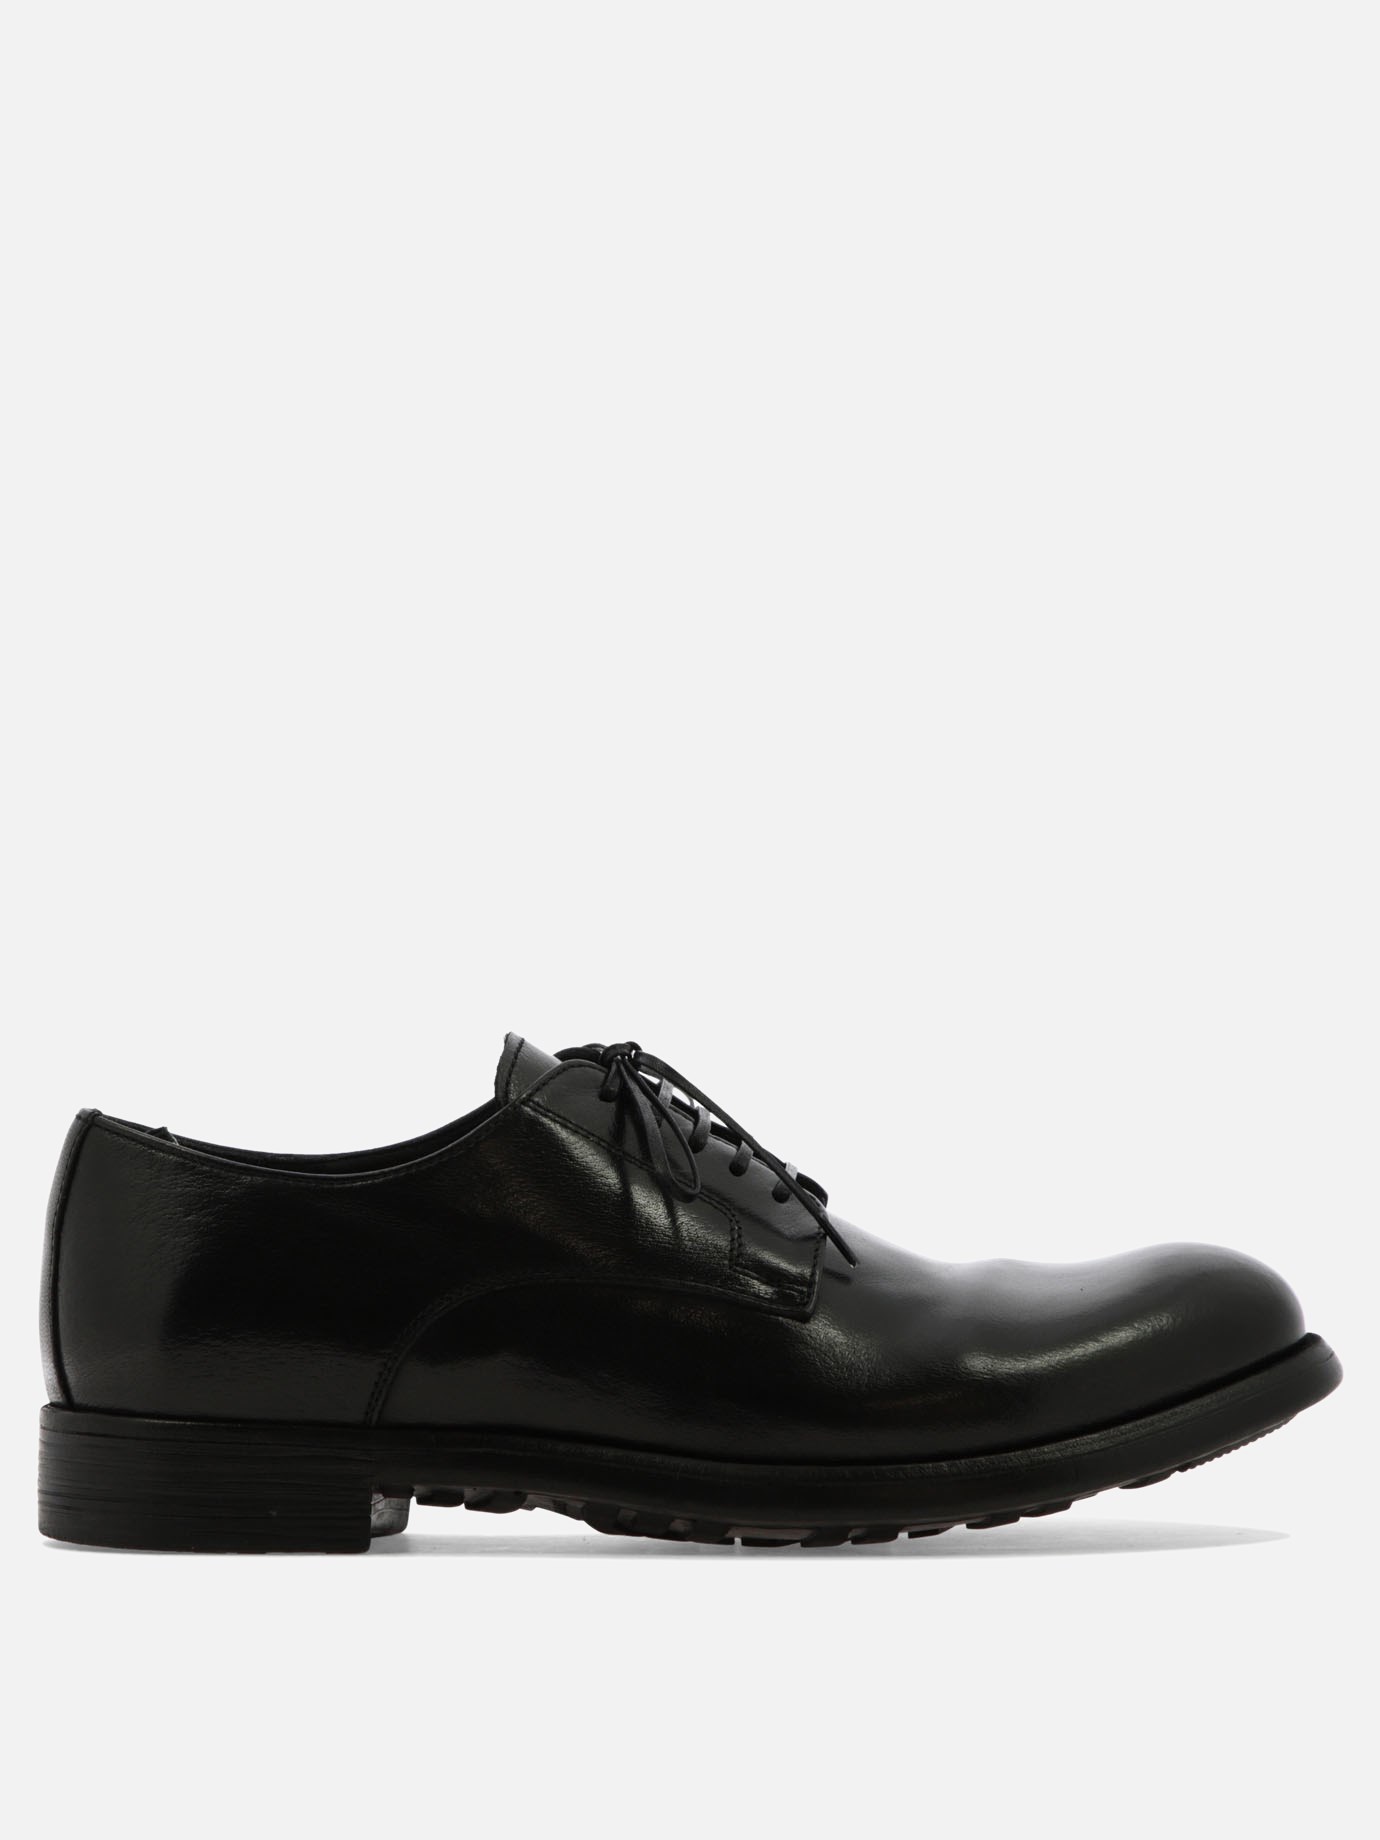  Chronicle  lace-up shoesby Officine Creative - 2